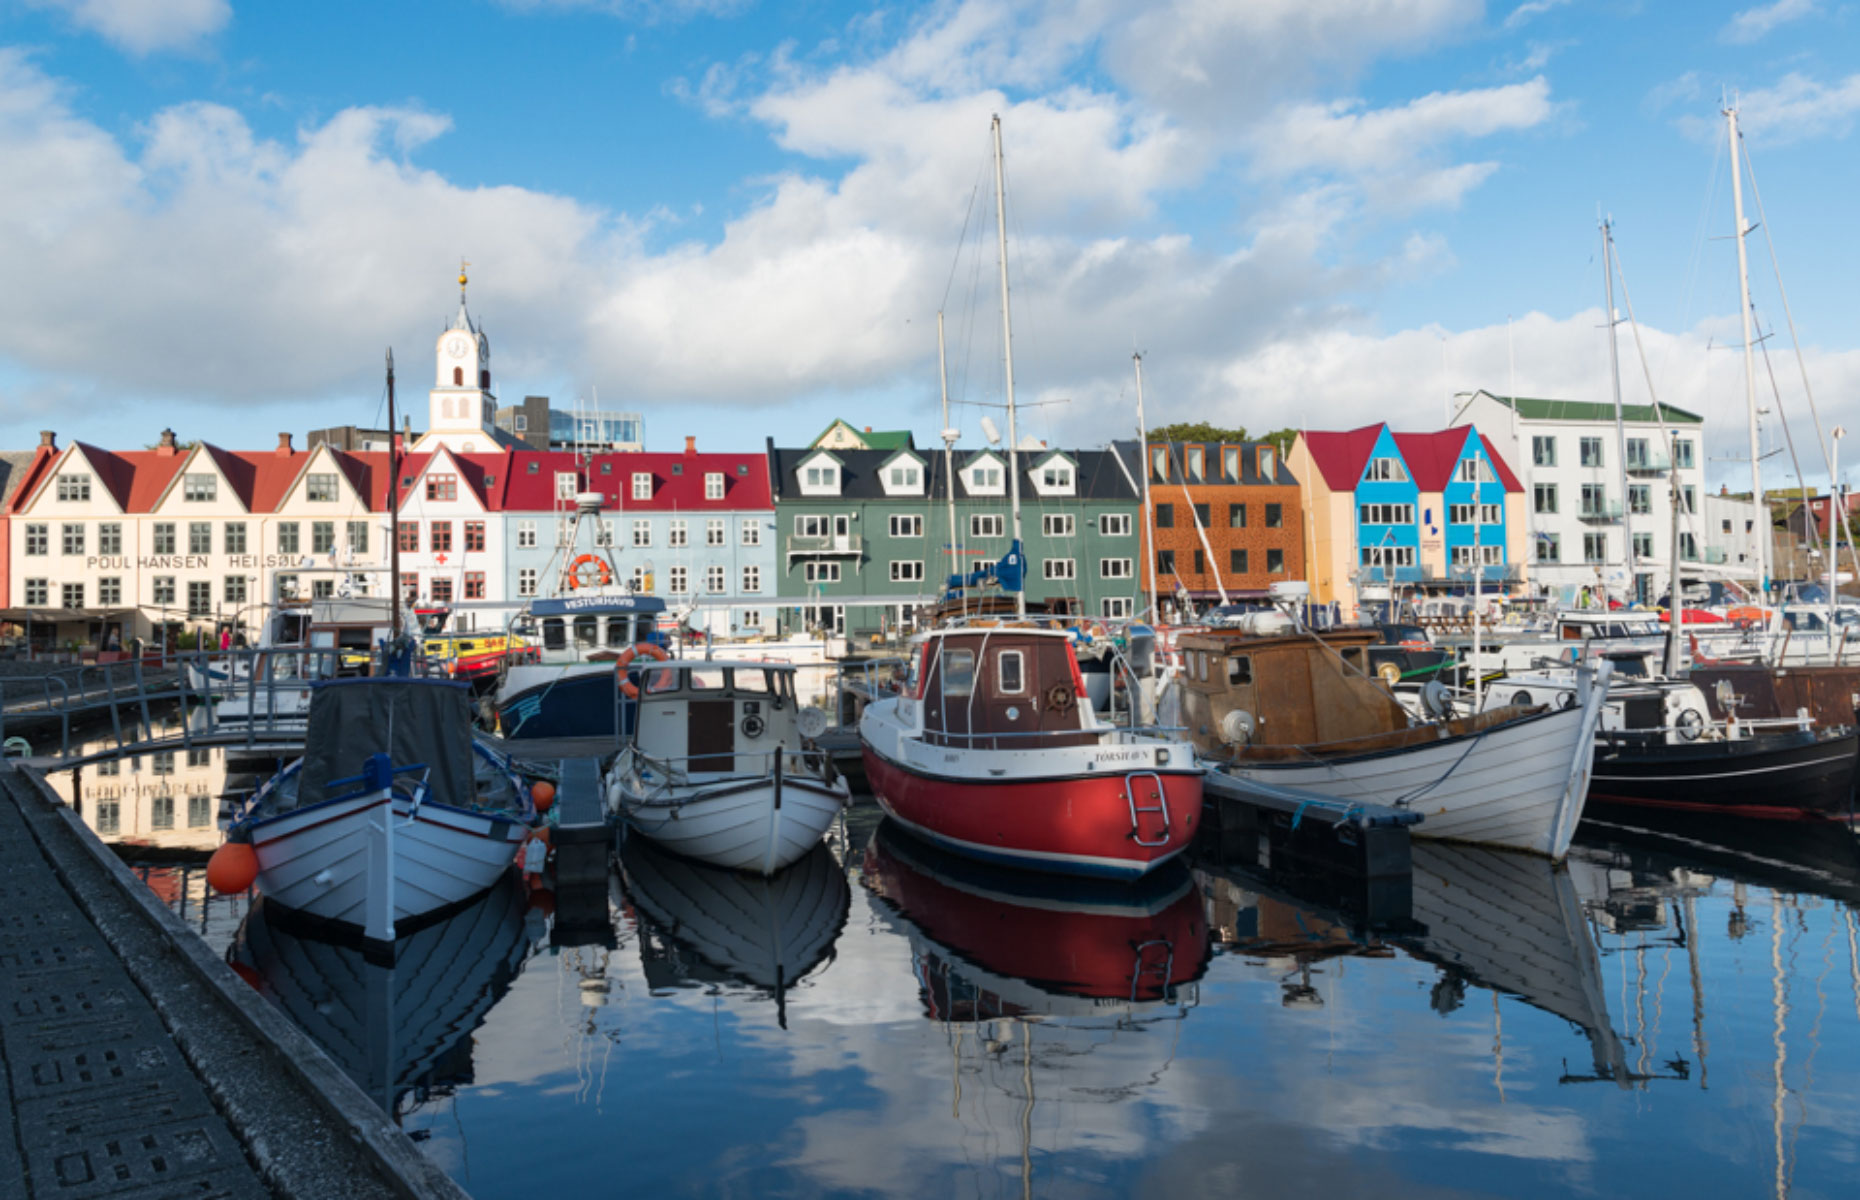 Torshavn, the capital of the Faroe Islands with its colourful harbour and bobbing boats